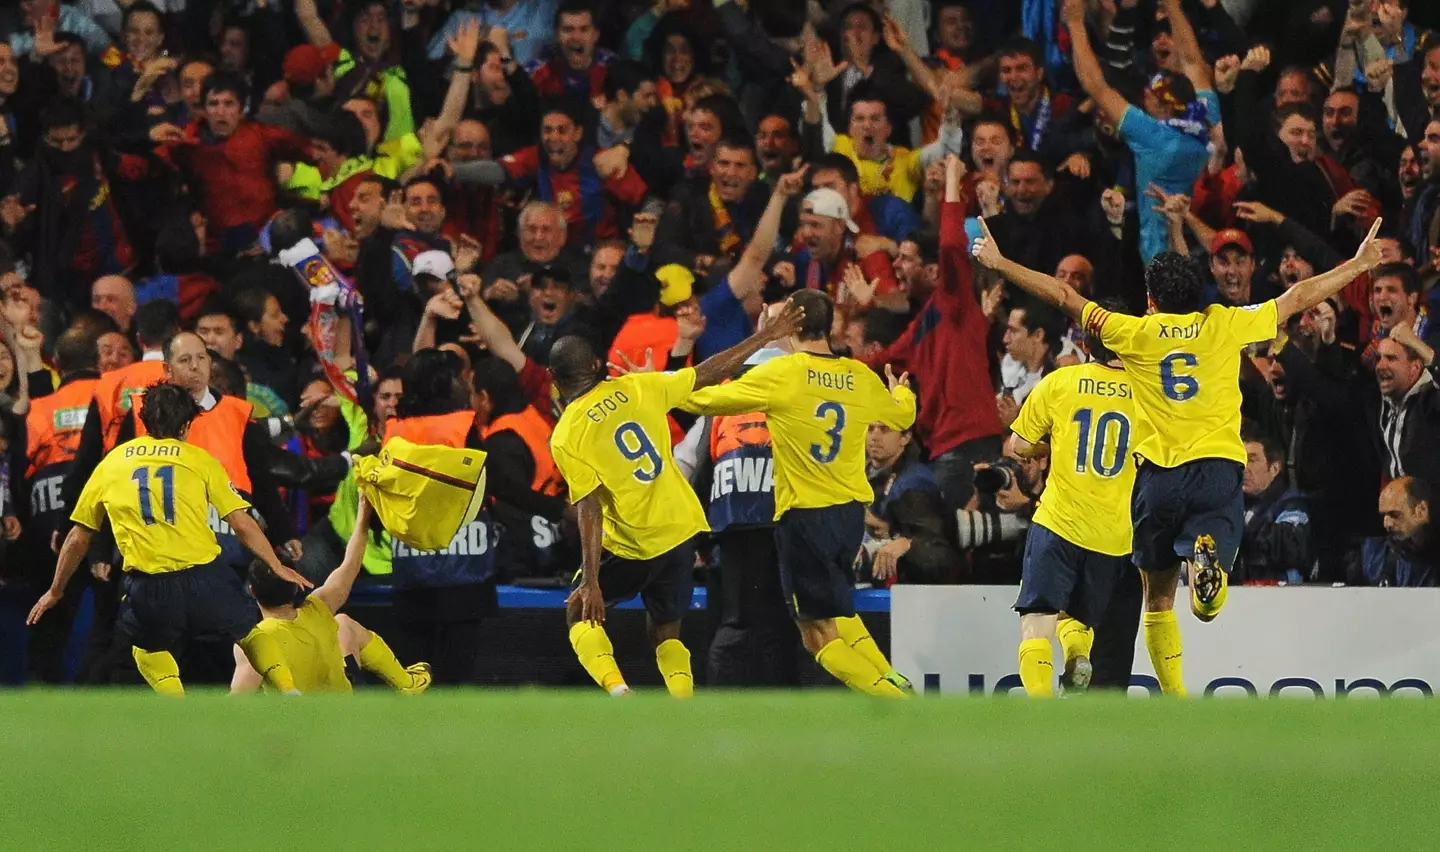 Barcelona emerged victorious and went on to win the 2009 Champions League. (